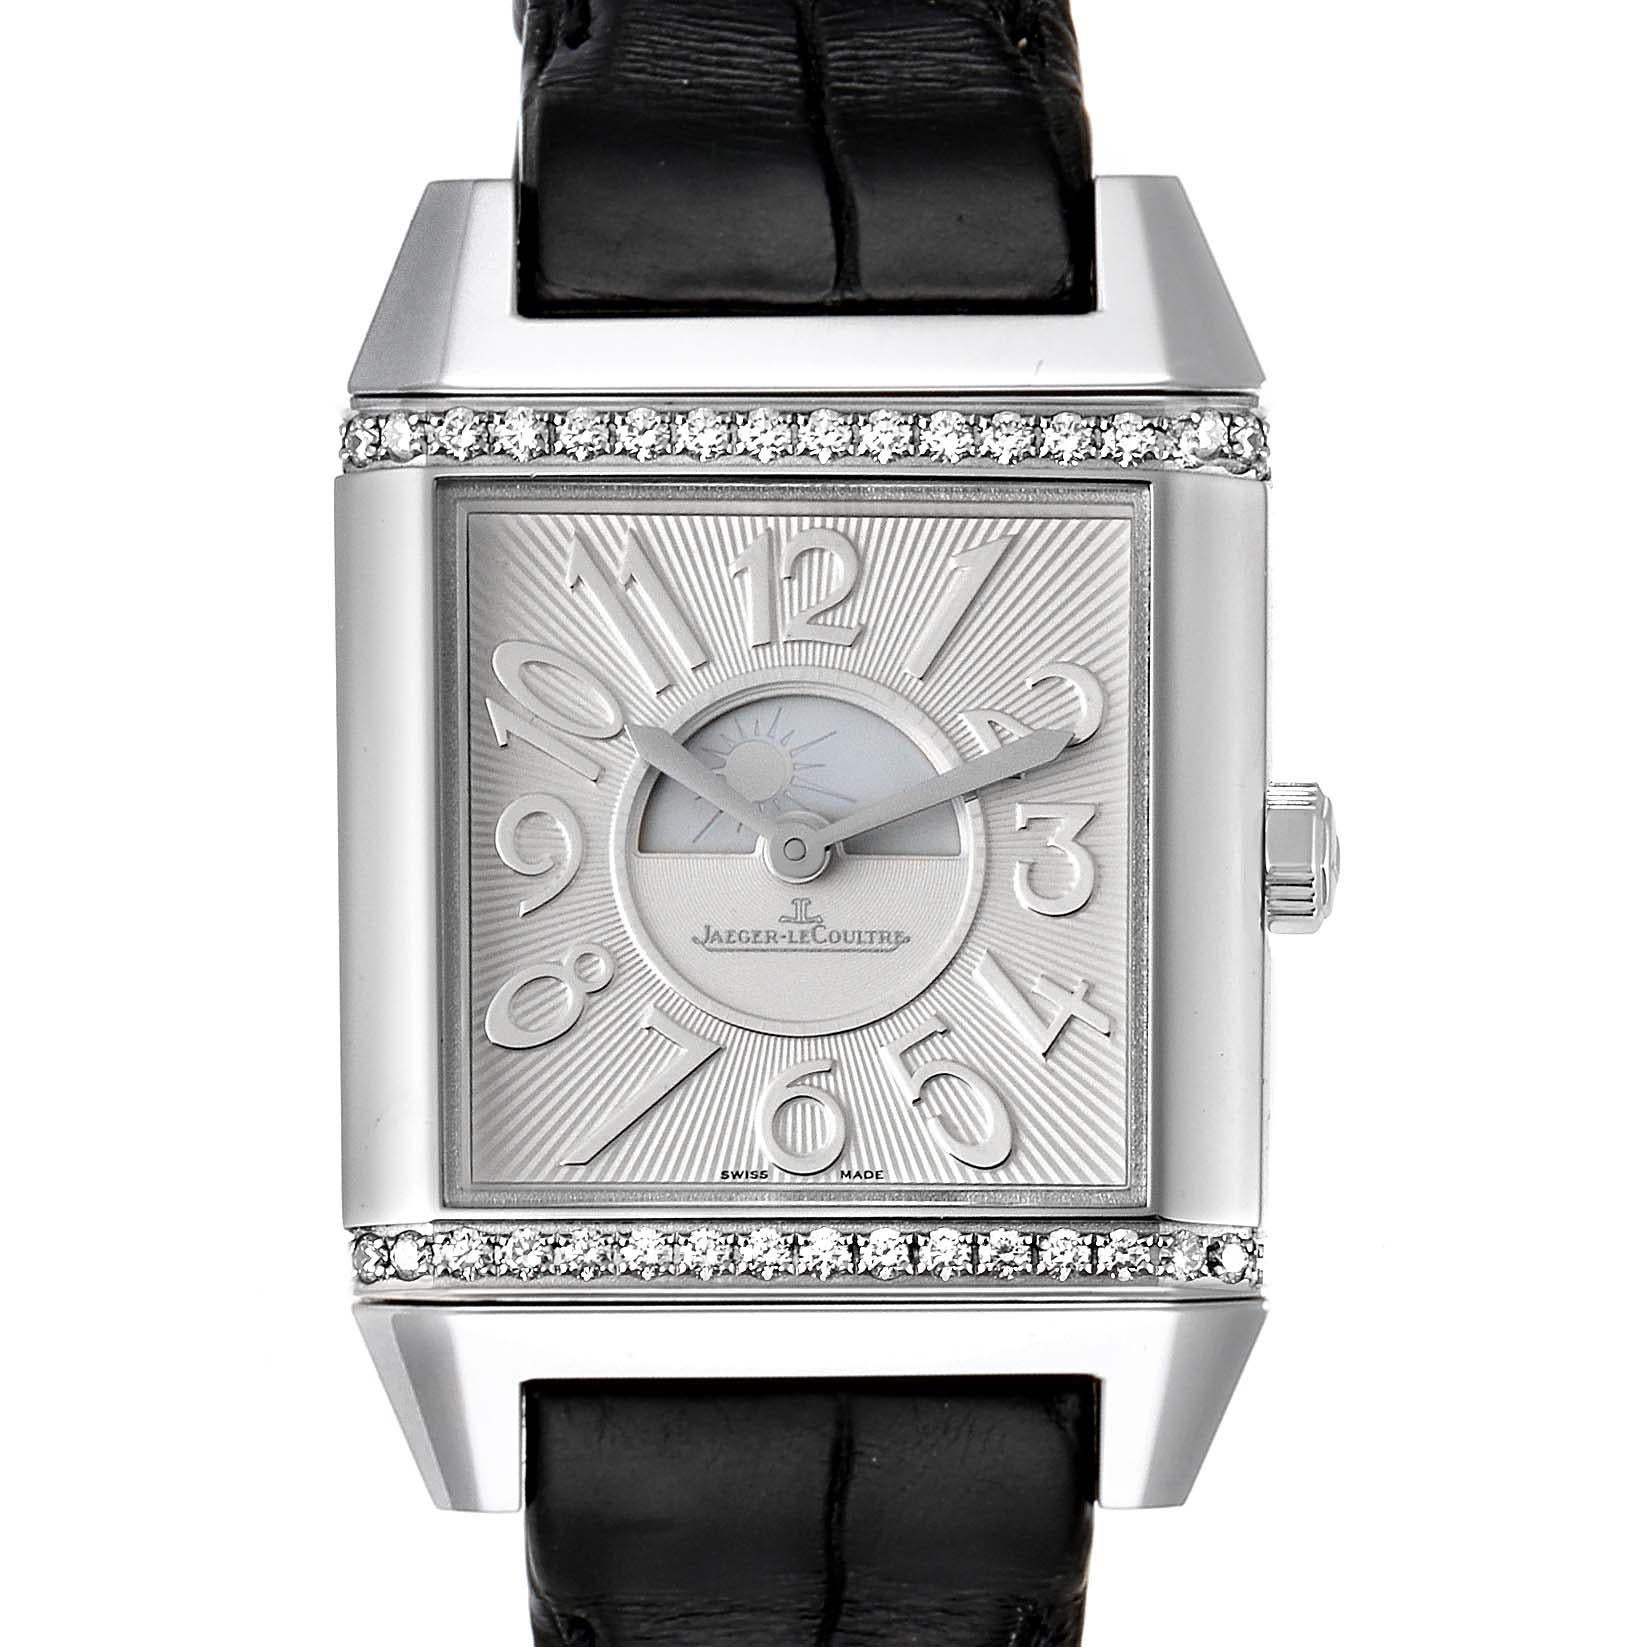 Jaeger LeCoultre Reverso Squadra Duetto Diamond Ladies Watch 235.8.76 Q7058430. Automatic self-winding movement. Stainless steel 42 mm x 28.8 mm mm rectangular case with reeded ends, rotating within its back plate. Stainless steel factory JLC